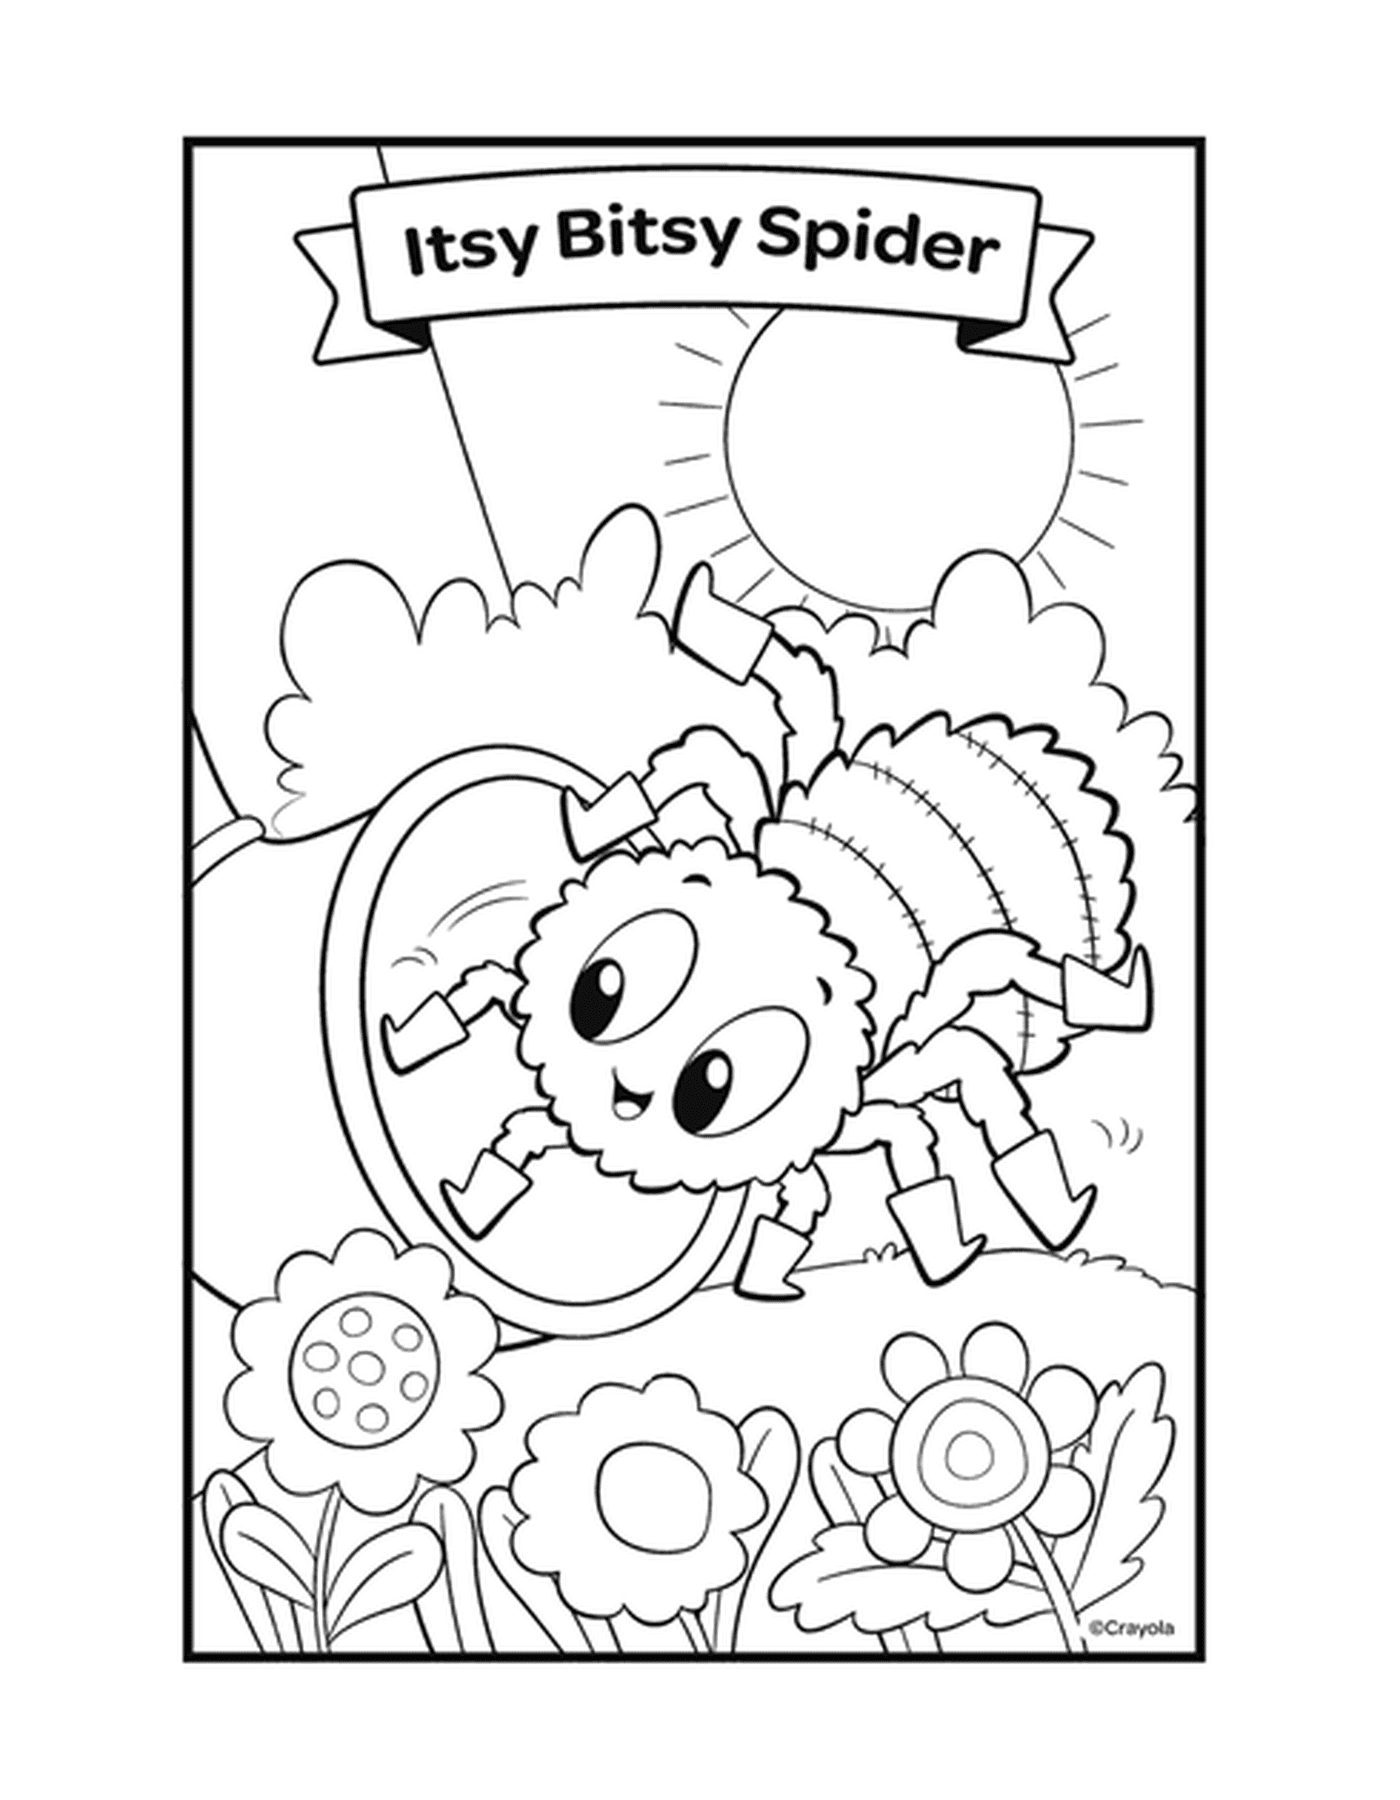  The Itsy Bitsy Spider rhyme with a spider on a web 